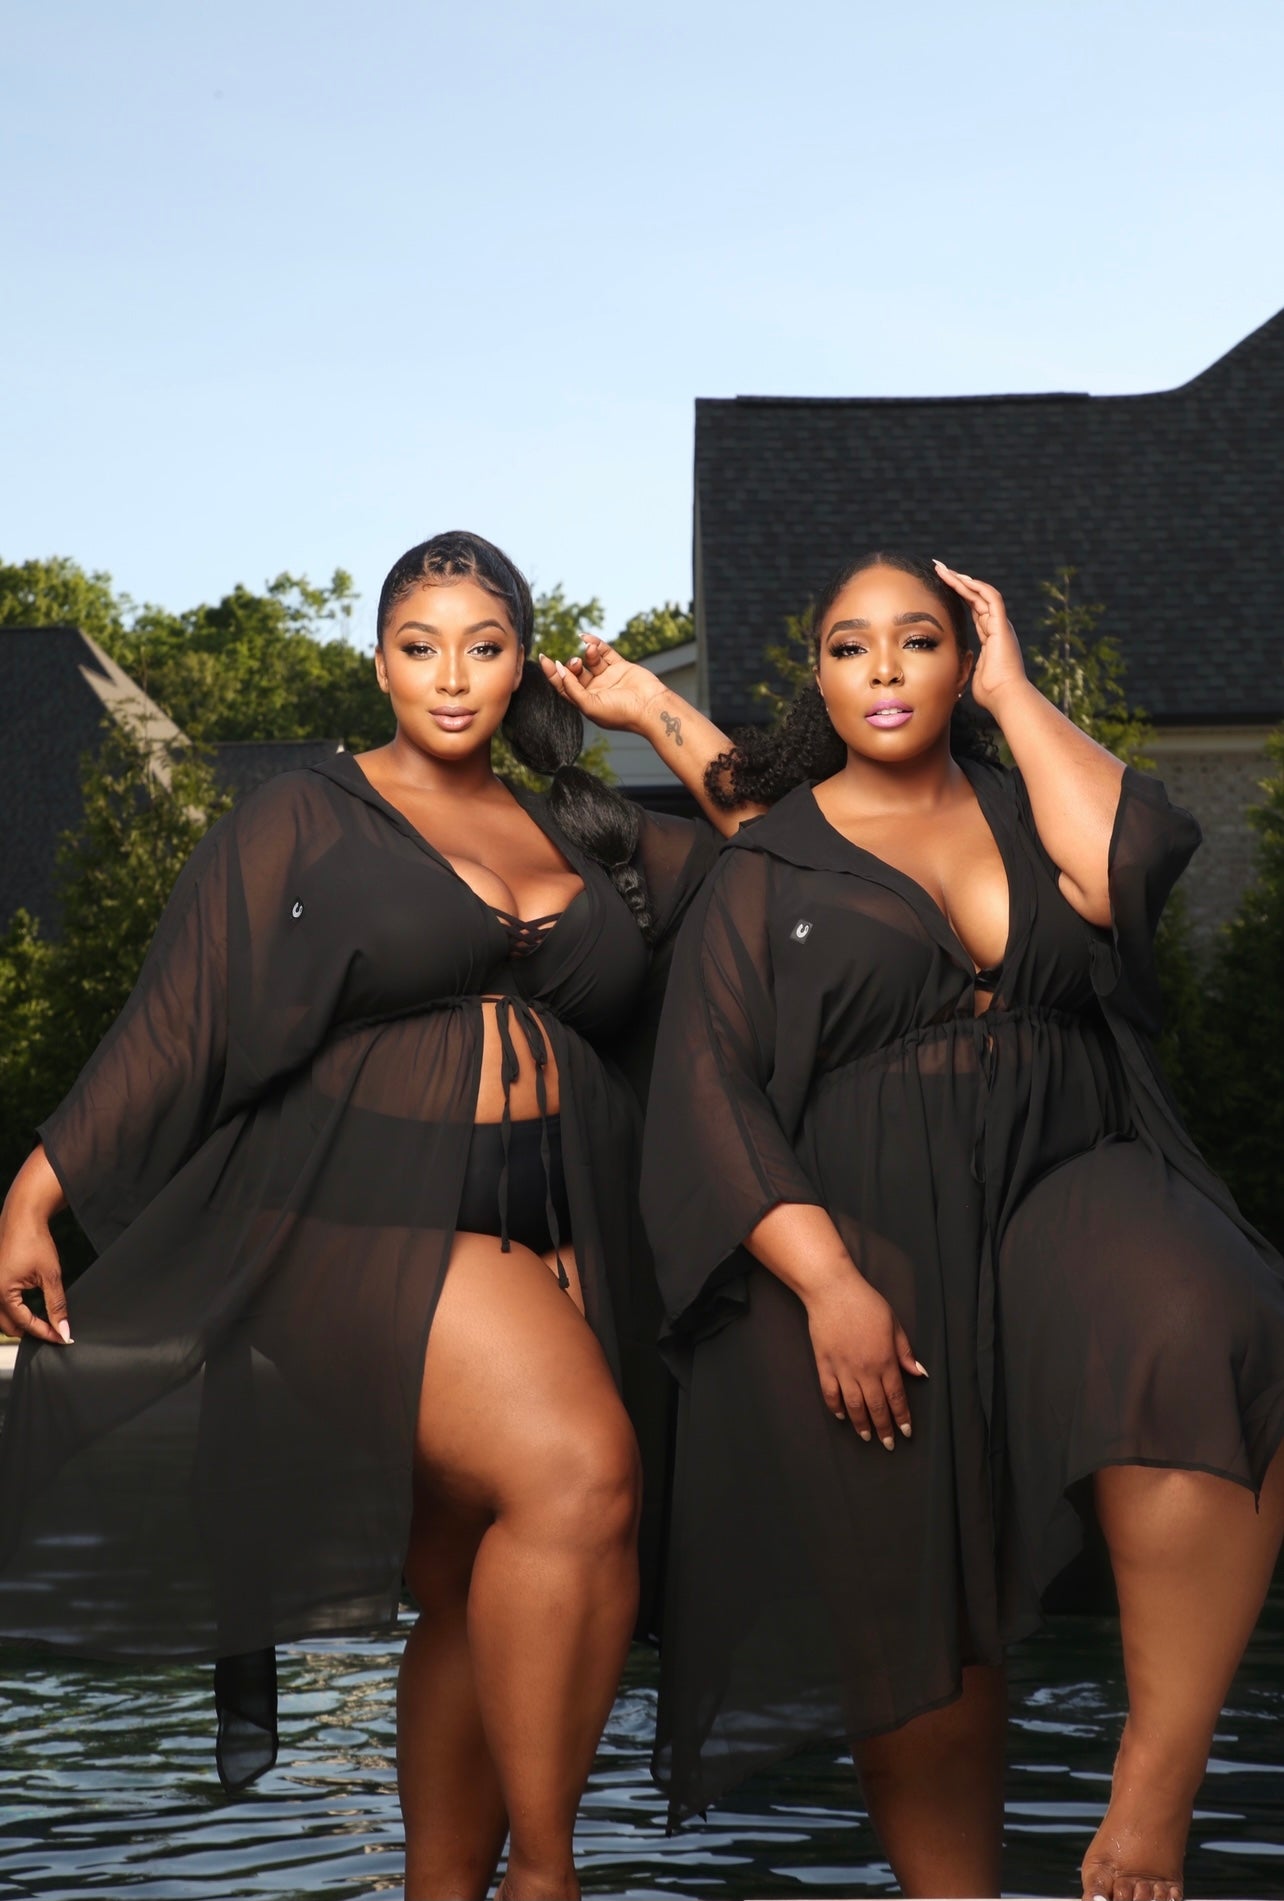 10+ Black Owned Plus Size Boutiques & Showrooms To Know & Shop!